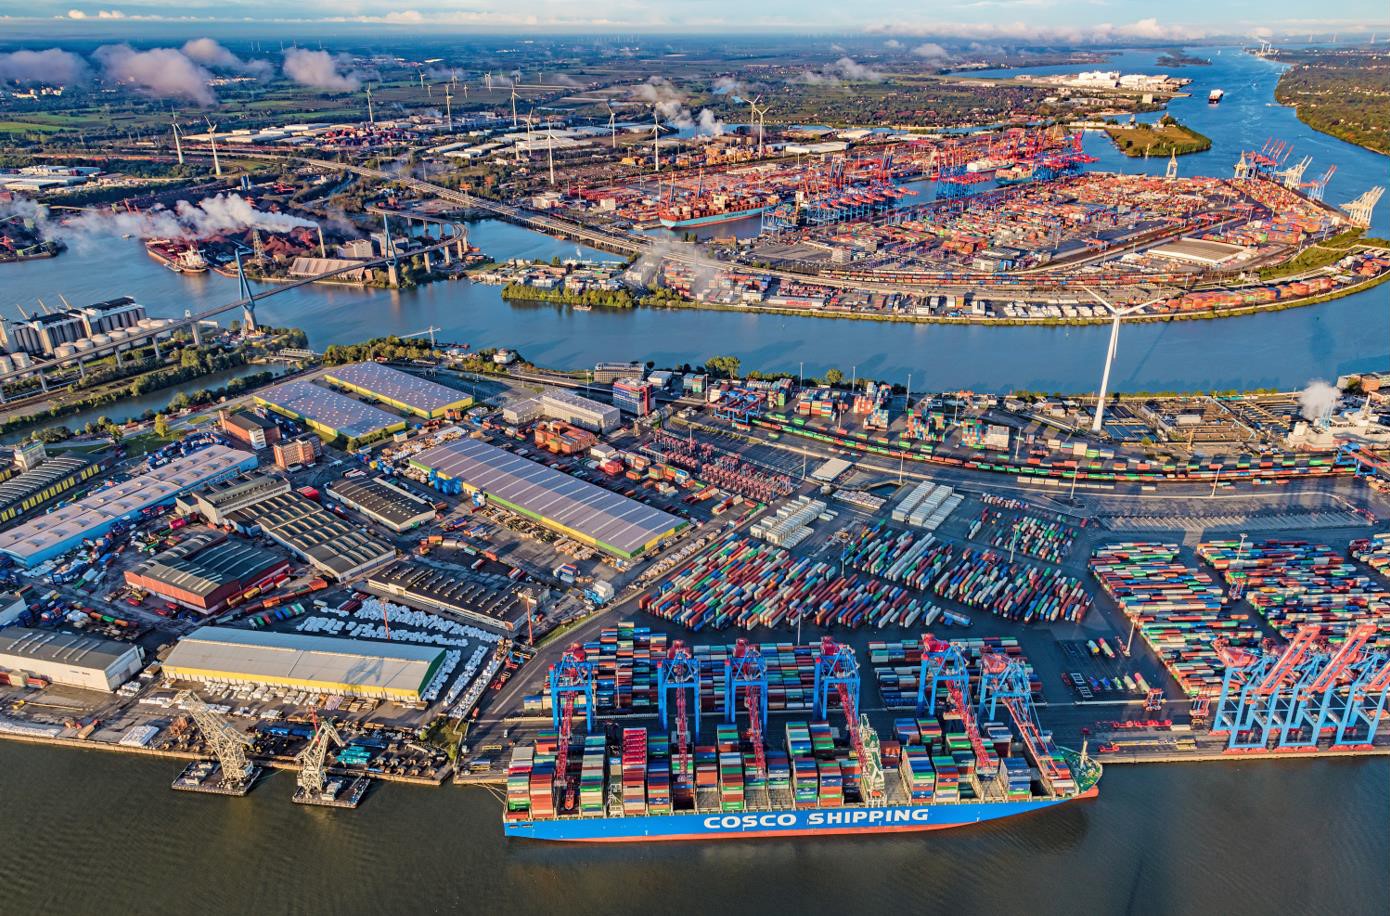 COSCO SHIPPING Ports Will Acquire 35% Shares of Container Terminal Tollerort in the Port of Hamburg, Germany - Logistics Manager